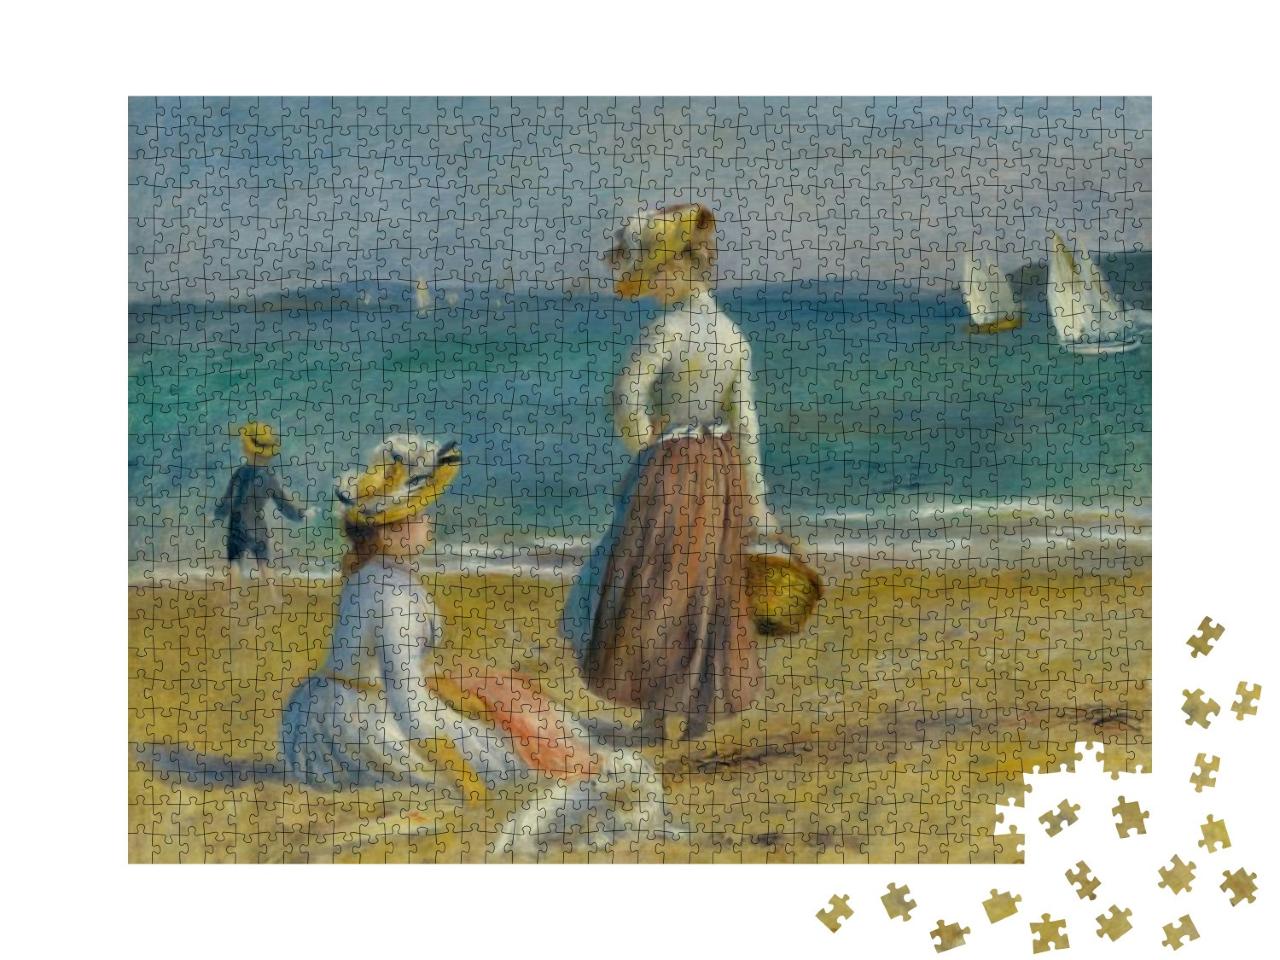 Figures on the Beach, by Auguste Renoir, 1890, French Imp... Jigsaw Puzzle with 1000 pieces